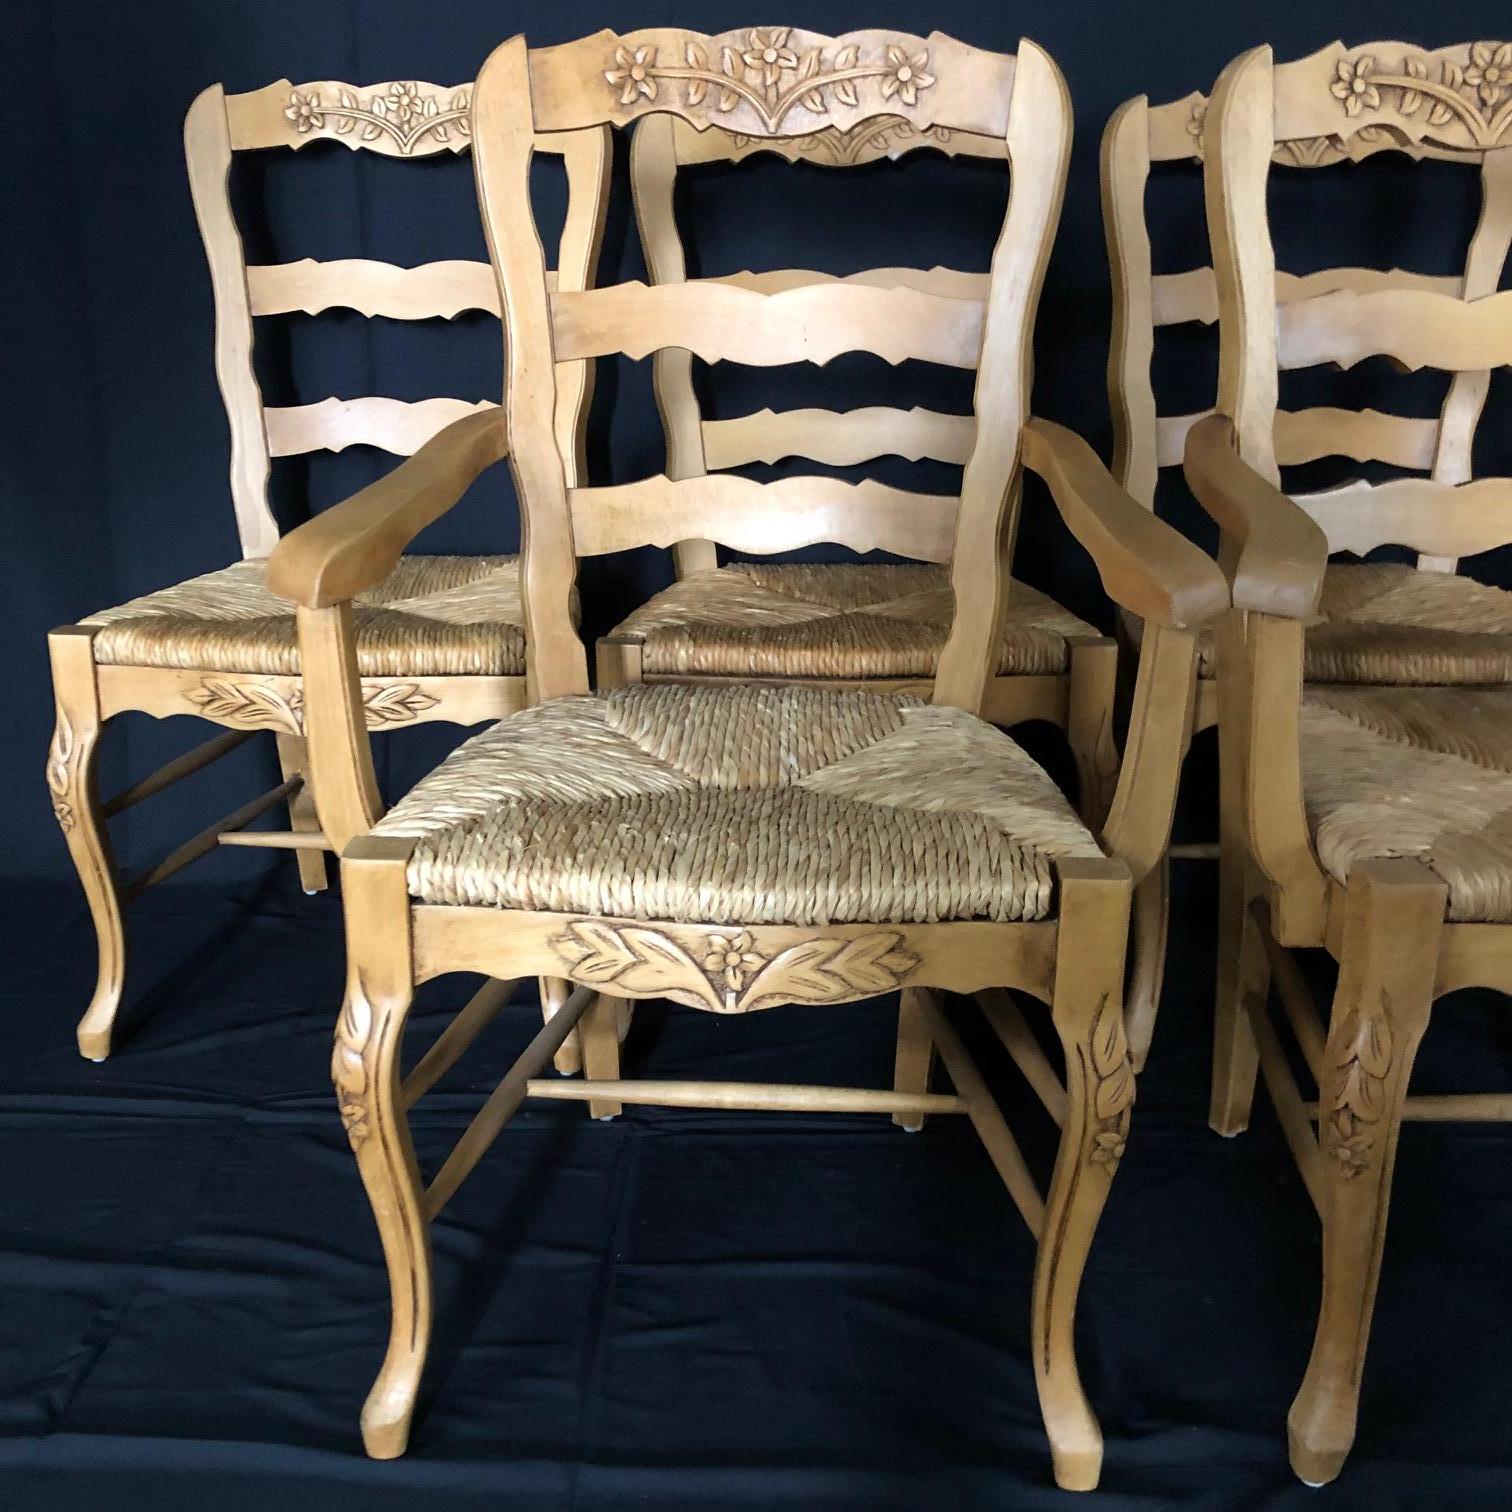 Immaculate set of six 20th century Provincial walnut chairs with lovely carving on the ladderback tops, on the apron, and on the elegant cabriole legs. Two armchairs and four side chairs. The rush seats are all in excellent condition and the chairs